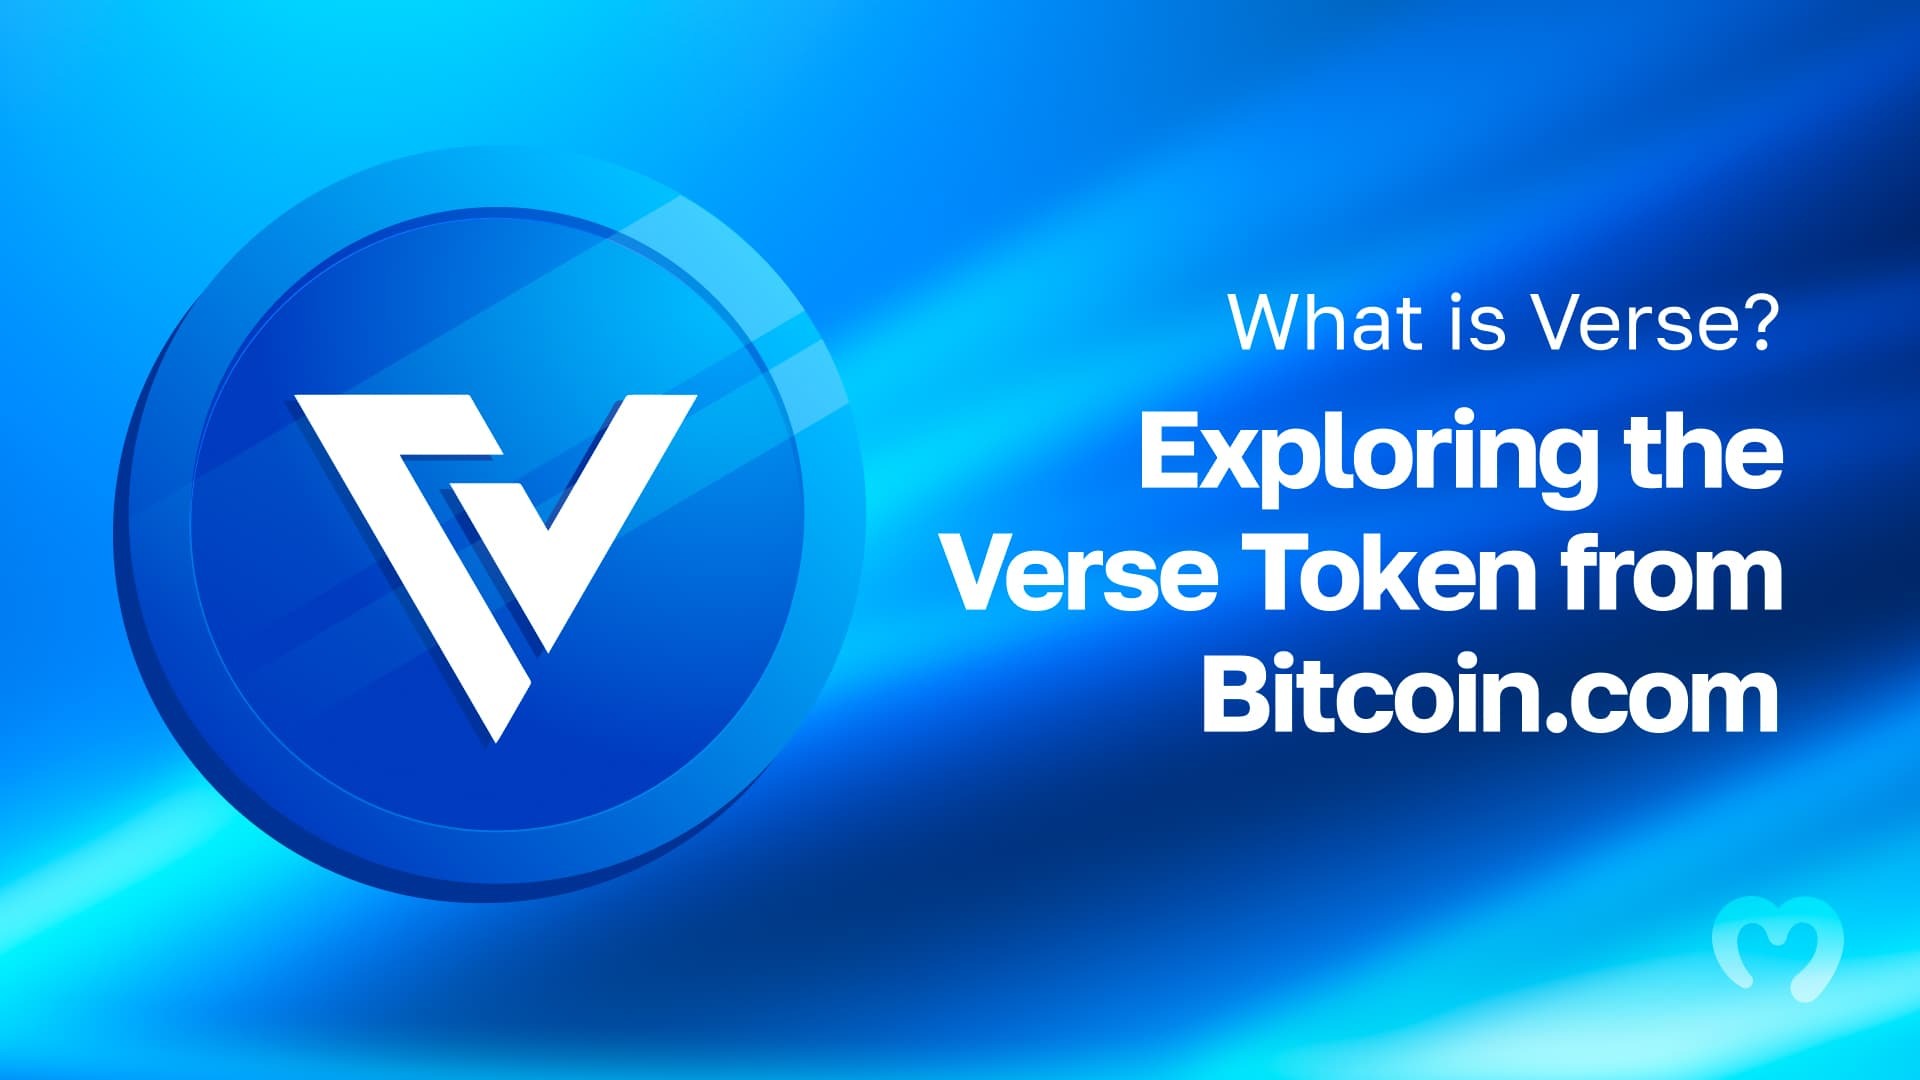 What is Verse? Exploring the Verse Token from Bitcoin.com